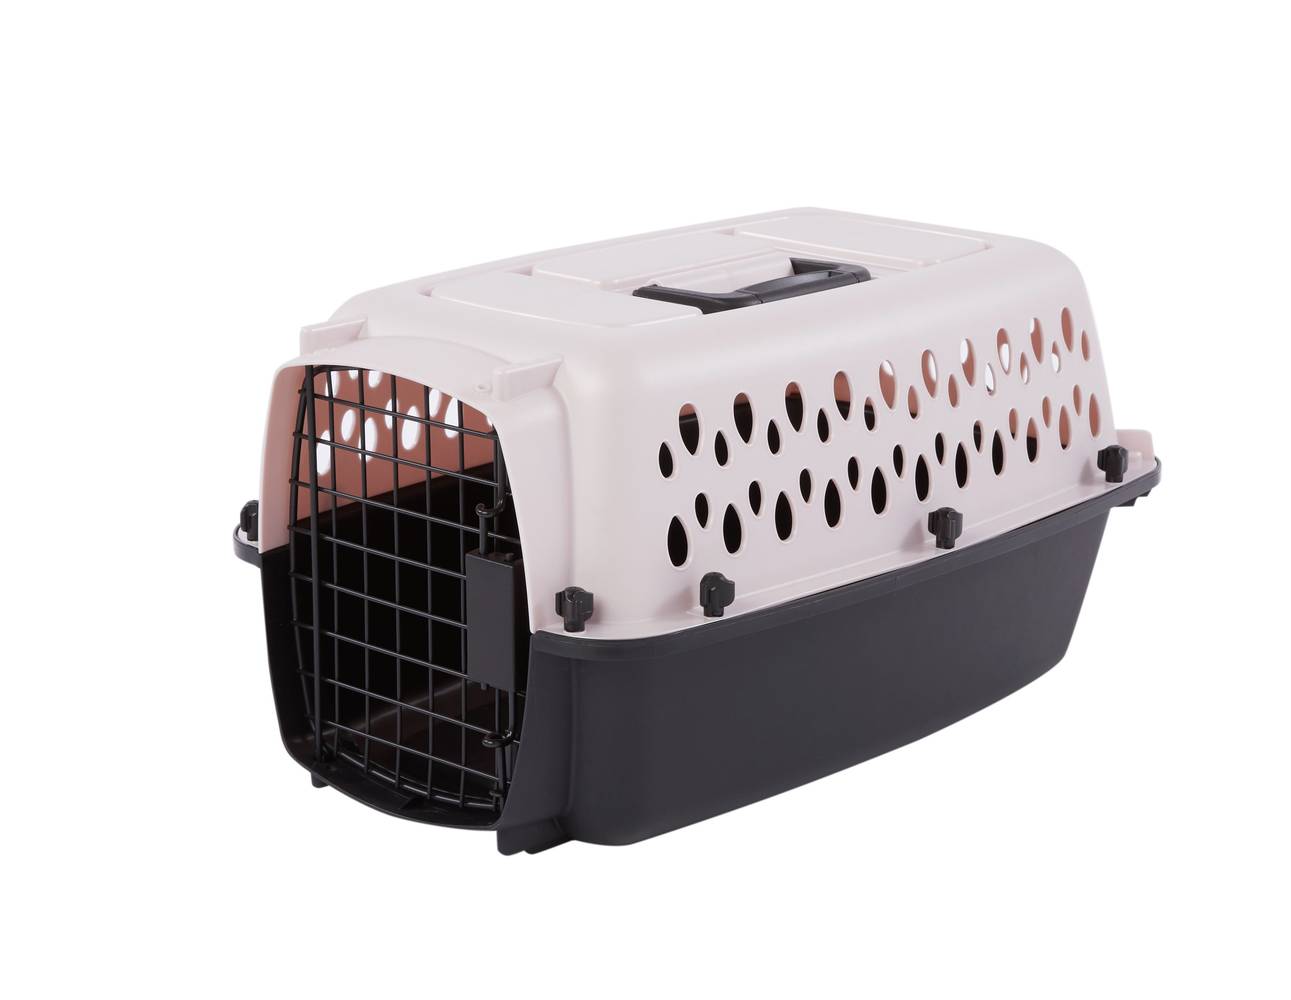 Top Paw Plastic Portable Dog Kennel (19" x 12" x 10.5")